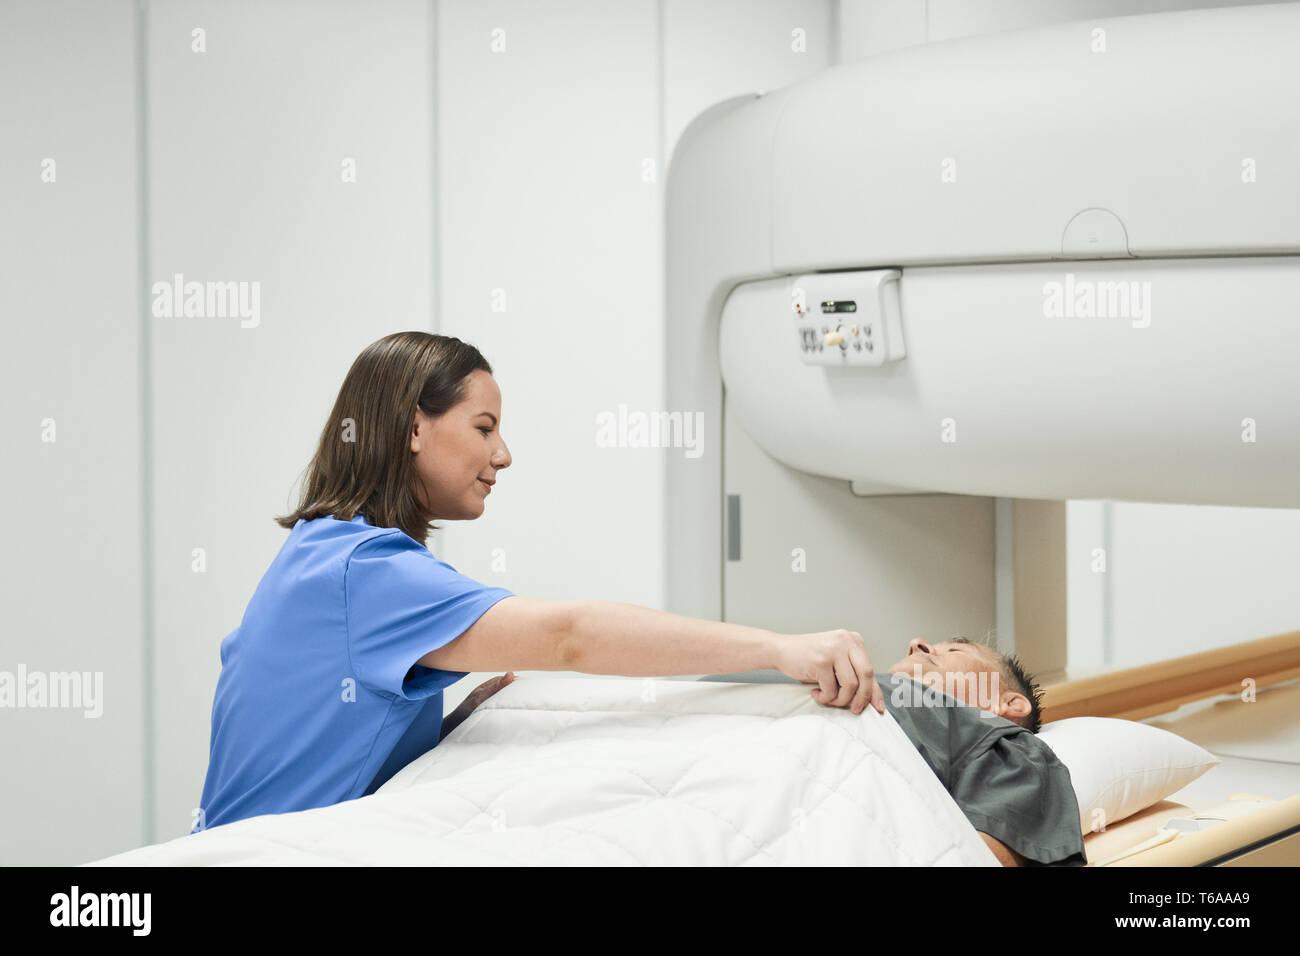 Medical Examination With Mri Magnetic Resonance Imaging Machine In Clinic Stock Photo